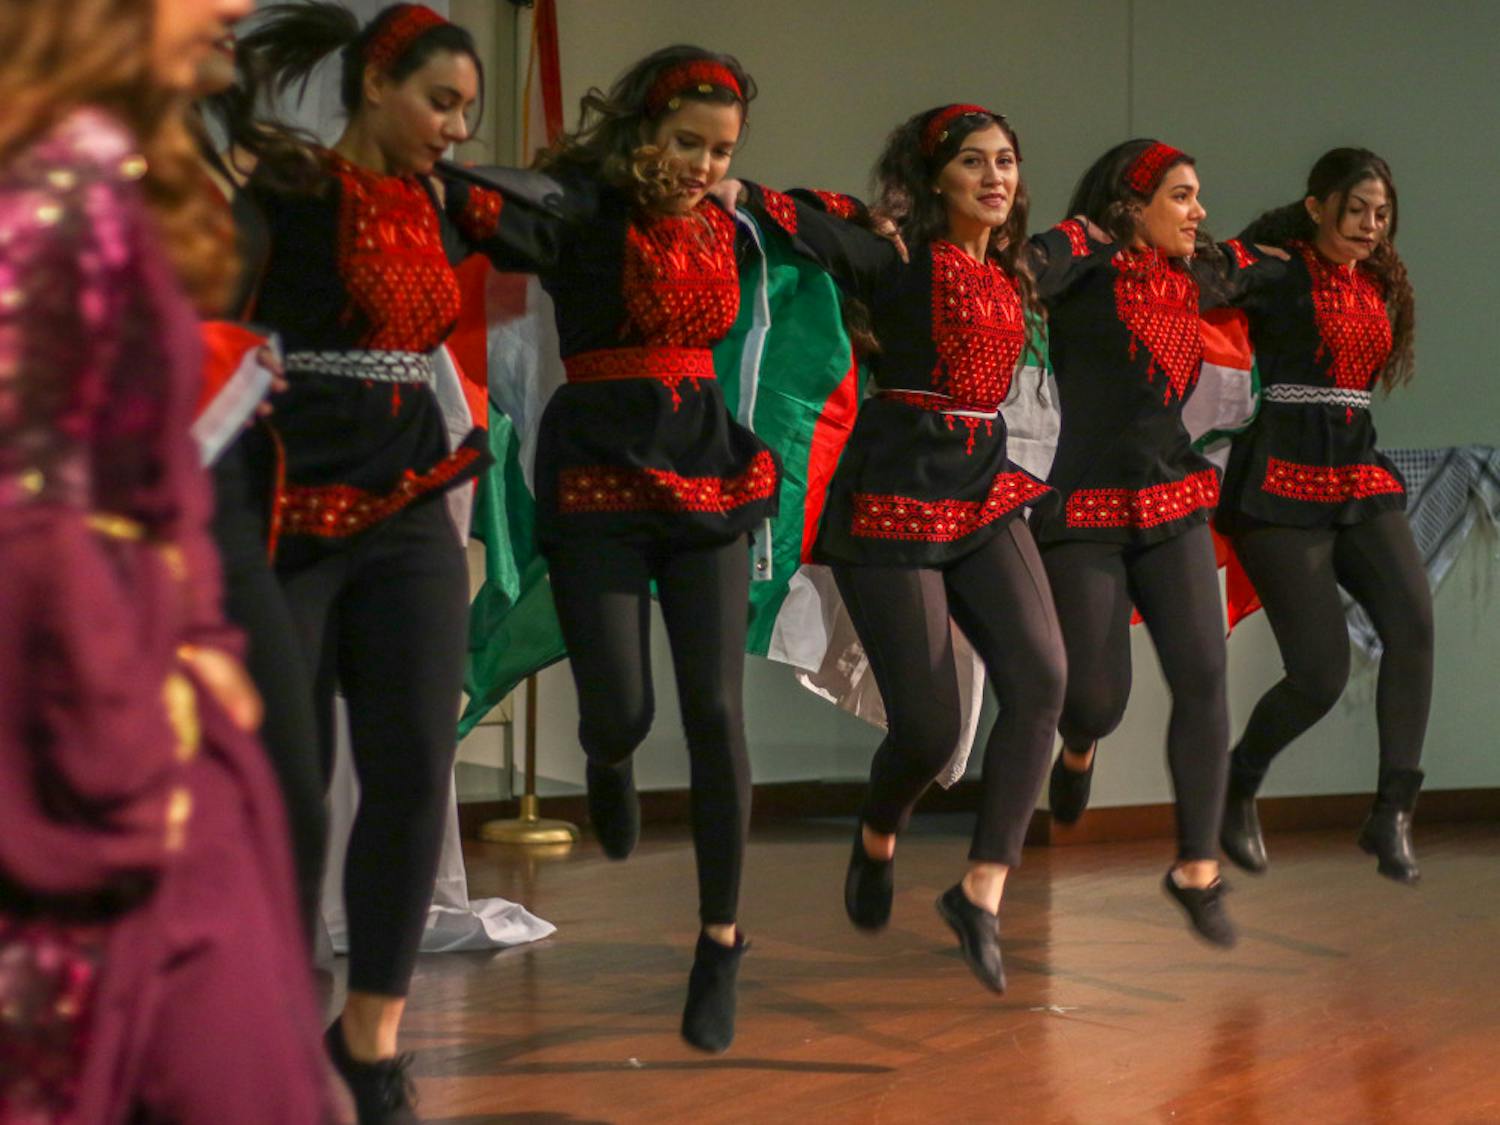 Bulls Dabke performs a traditional Levantine dance at Students for Justice in Palestine’s second annual Middle Eastern Fashion Show on Sunday. The group traveled from the University of South Florida to take part in the event. More than 100 people attended the fashion show, watched the dance performance and ate traditional Palestinian food.